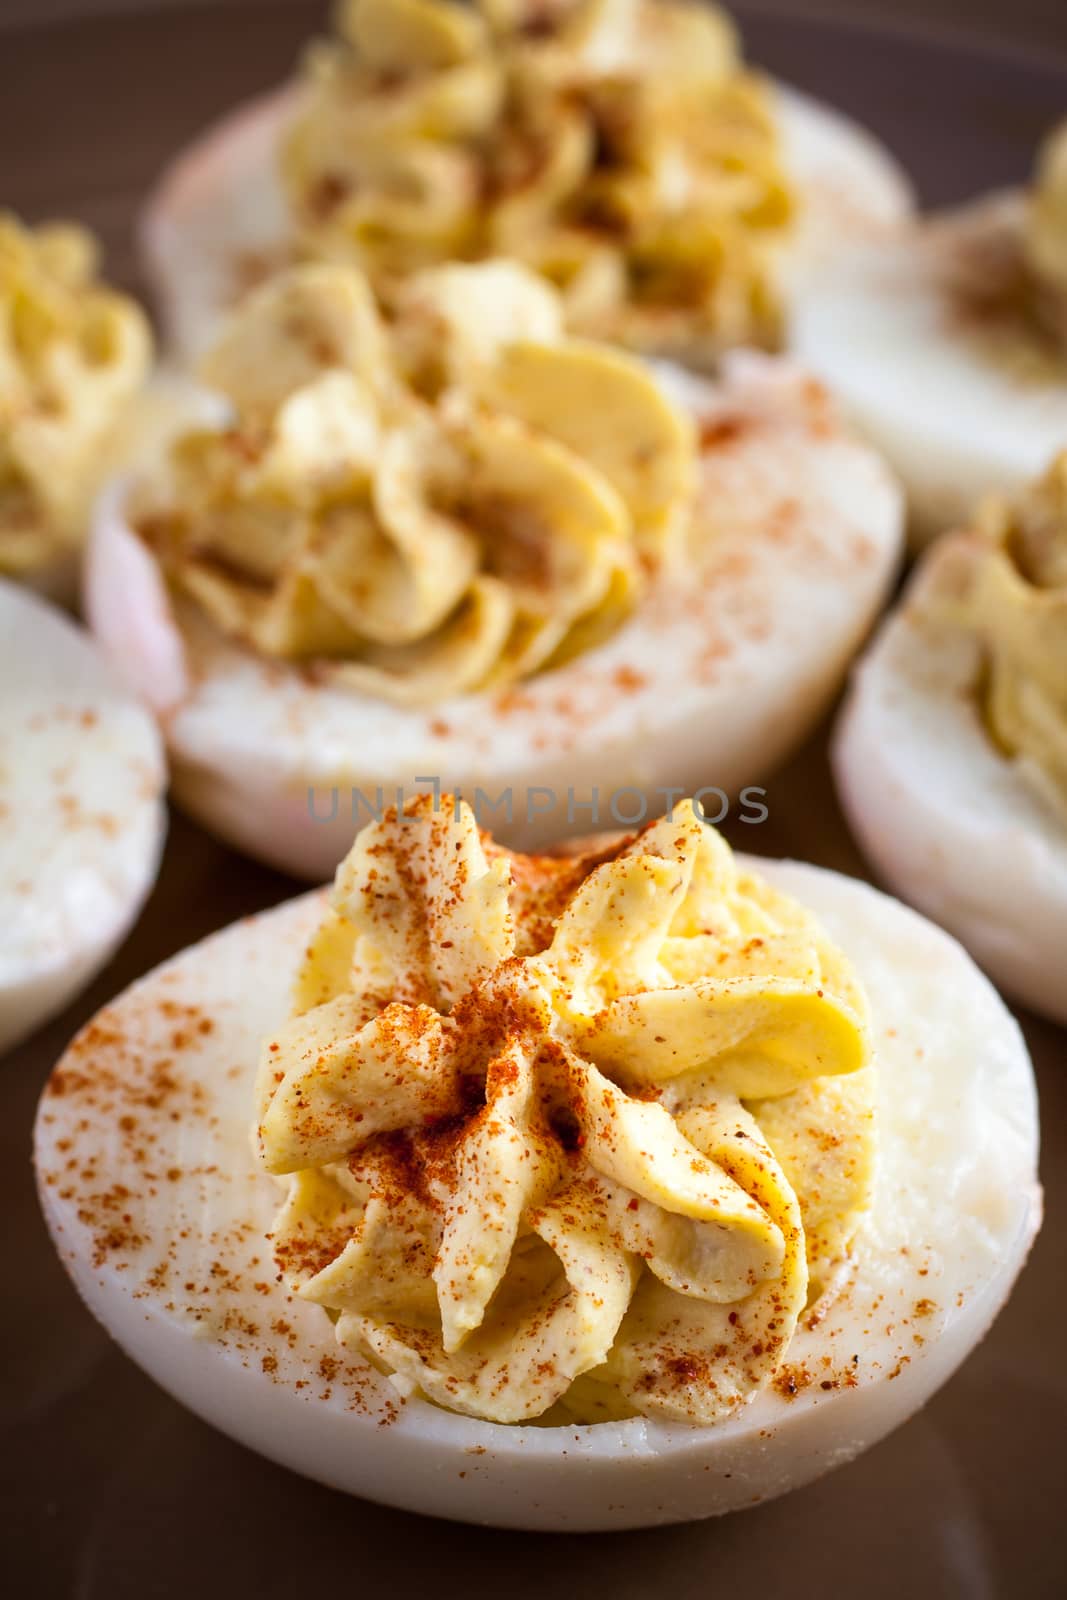 Deviled Eggs by SouthernLightStudios